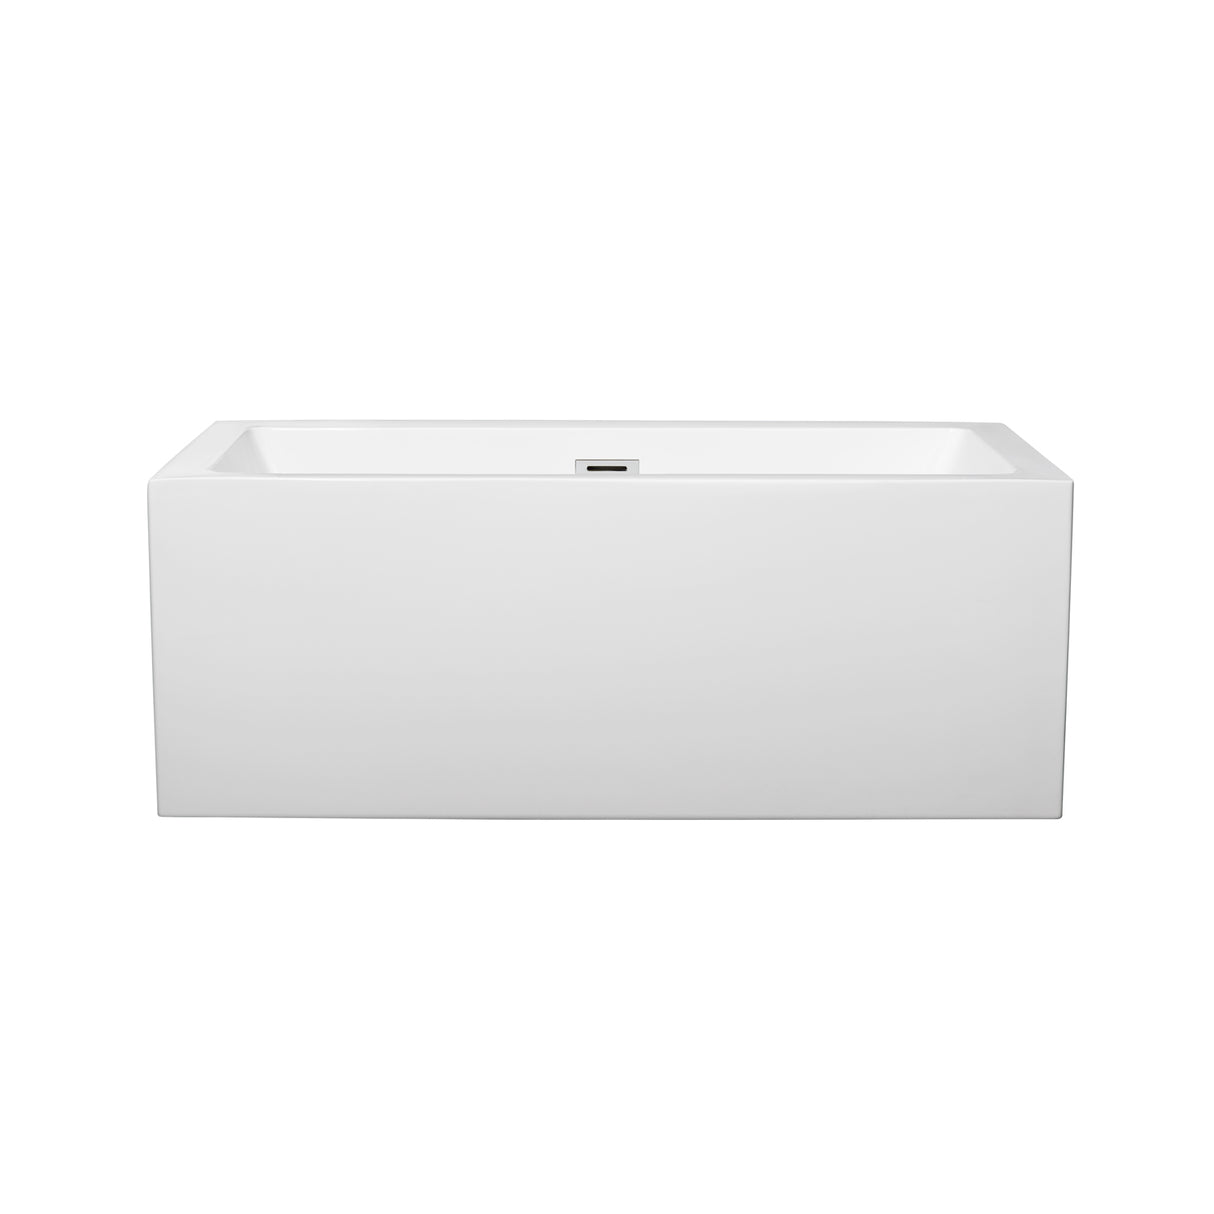 Melody 60 Inch Freestanding Bathtub in White with Polished Chrome Drain and Overflow Trim